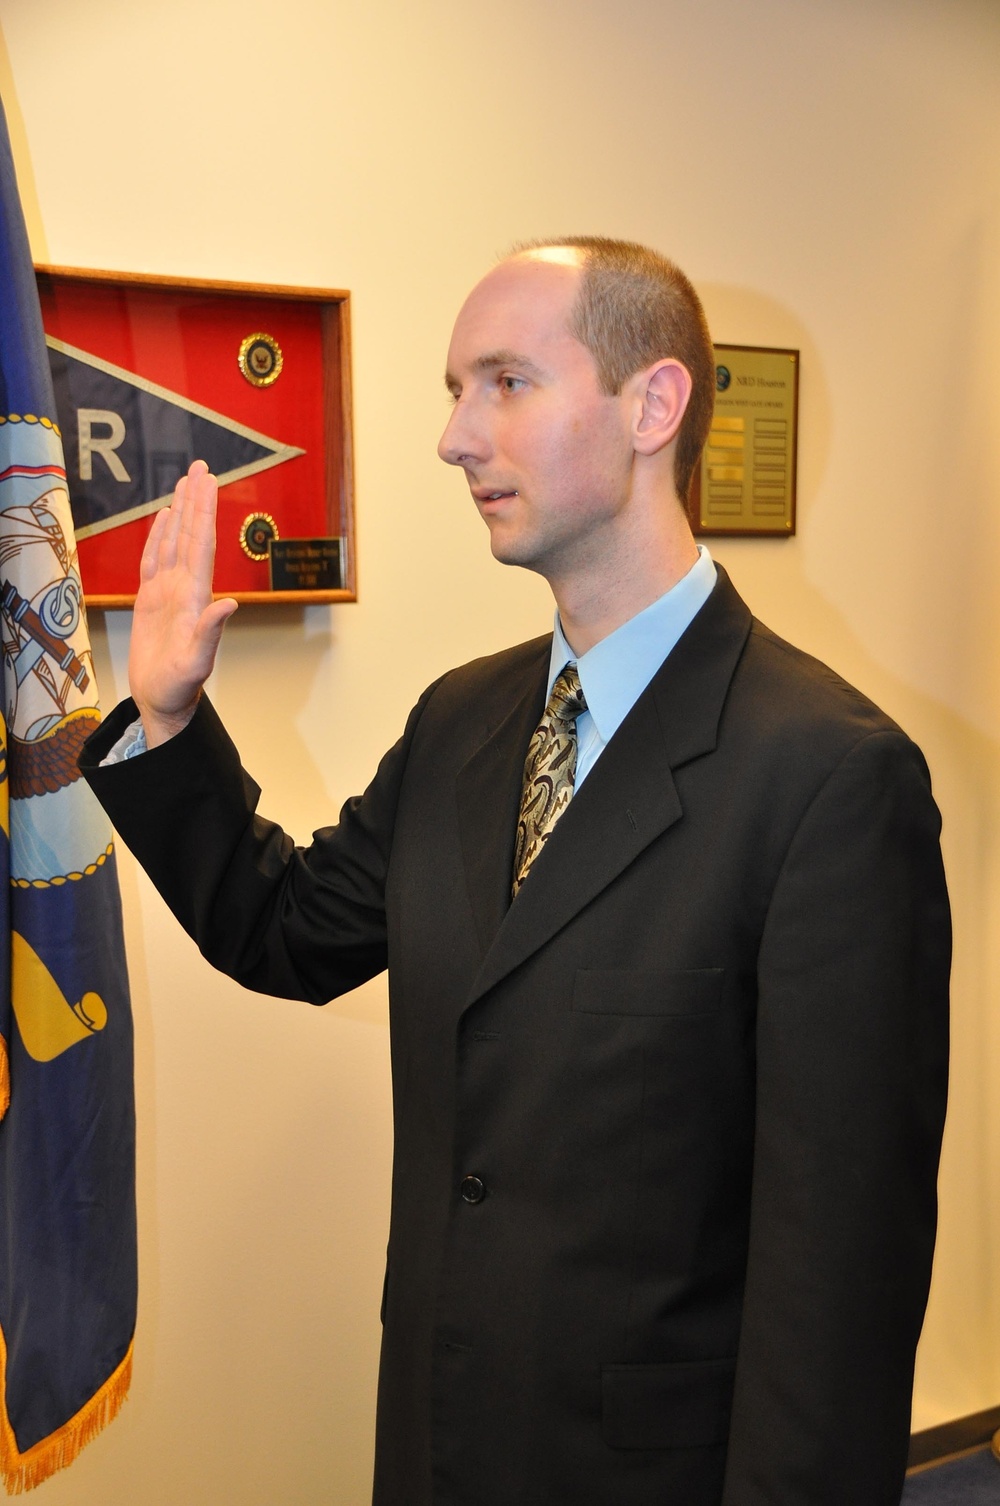 Swearing in ceremony